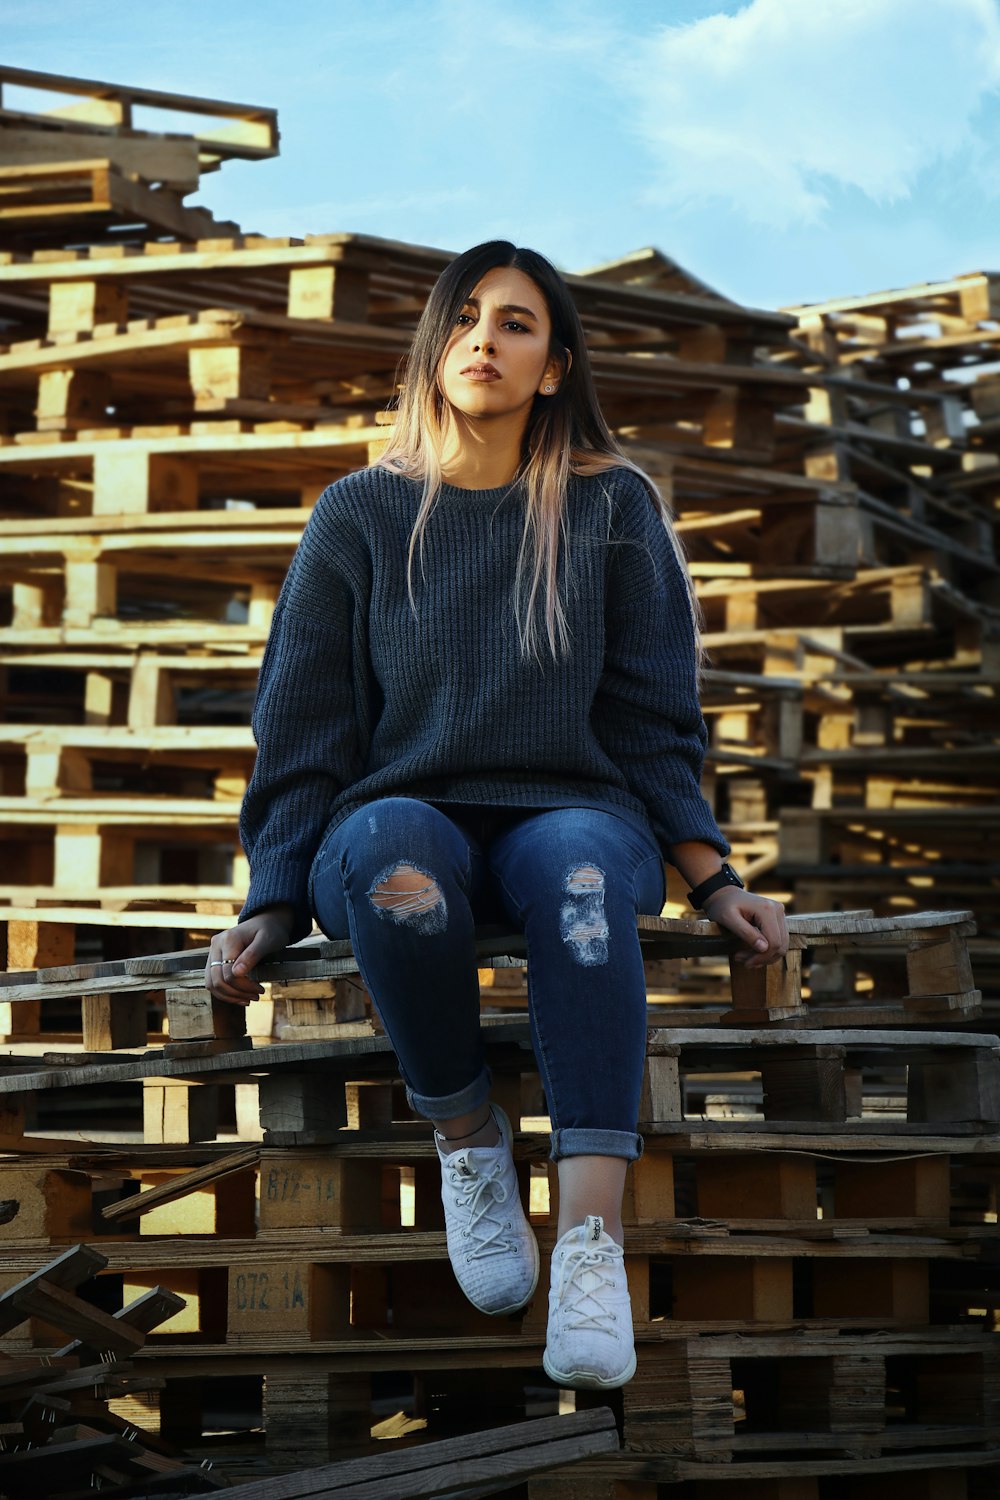 woman in gray sweater and blue denim jeans sitting on brown wooden chair